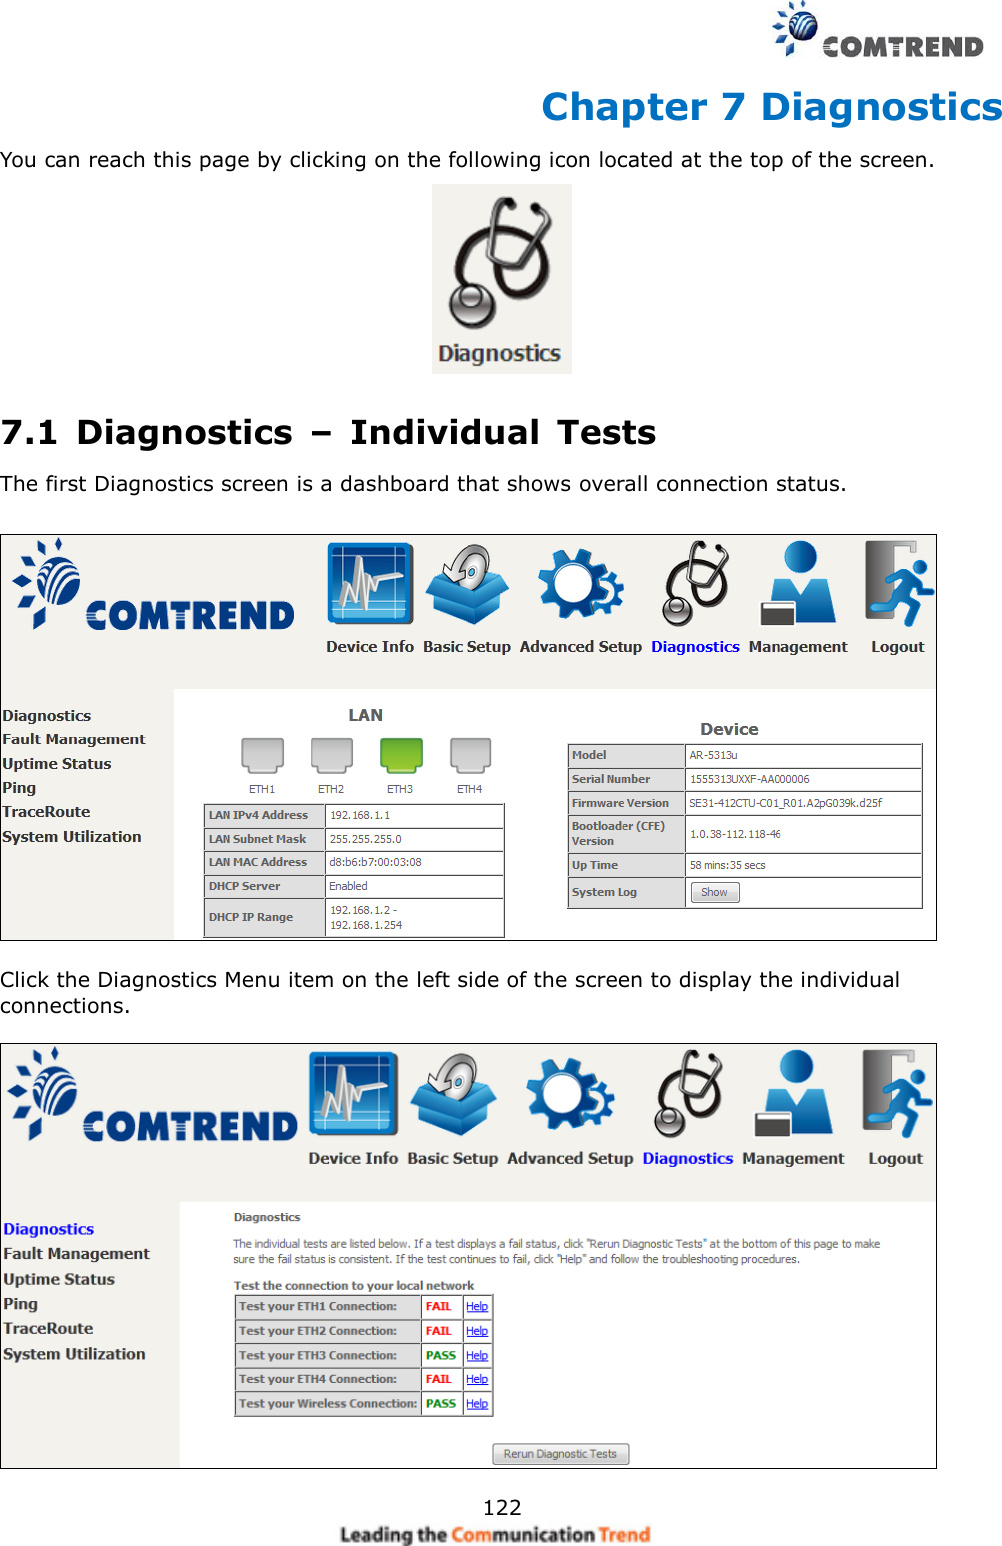     122 Chapter 7 Diagnostics You can reach this page by clicking on the following icon located at the top of the screen.  7.1  Diagnostics  –  Individual  Tests The first Diagnostics screen is a dashboard that shows overall connection status.      Click the Diagnostics Menu item on the left side of the screen to display the individual connections.    